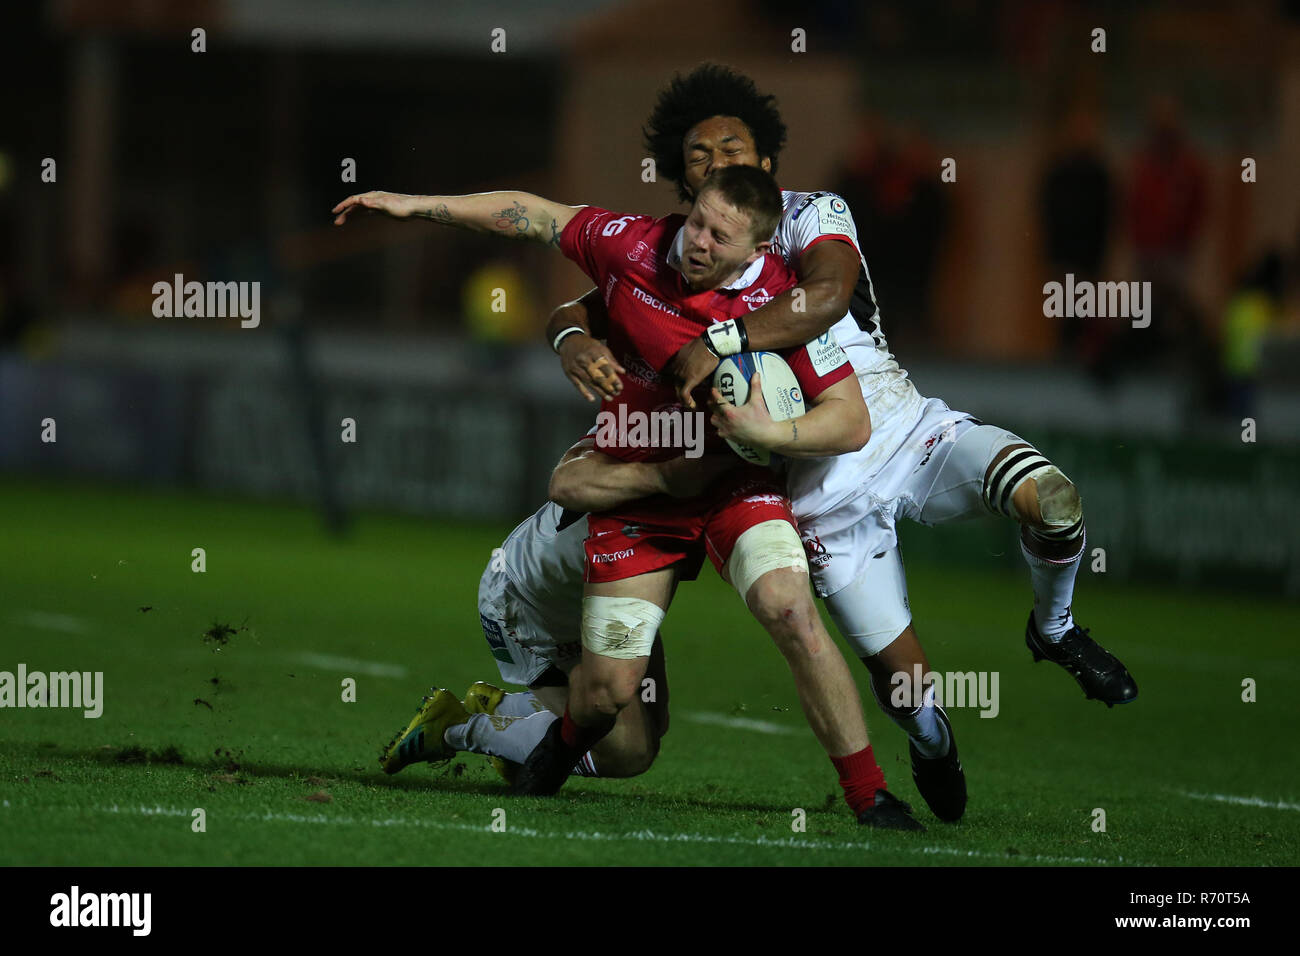 James Davies of the Scarlets is  tackled by Ulster's  Henry Speight ® . Scarlets v Ulster rugby, Heineken European Champions Cup, pool 4 match at Parc y Scarlets in Llanelli, South Wales on Friday 7th December 2018.  picture by Andrew Orchard/Andrew Orchard sports photography/Alamy Live News Stock Photo